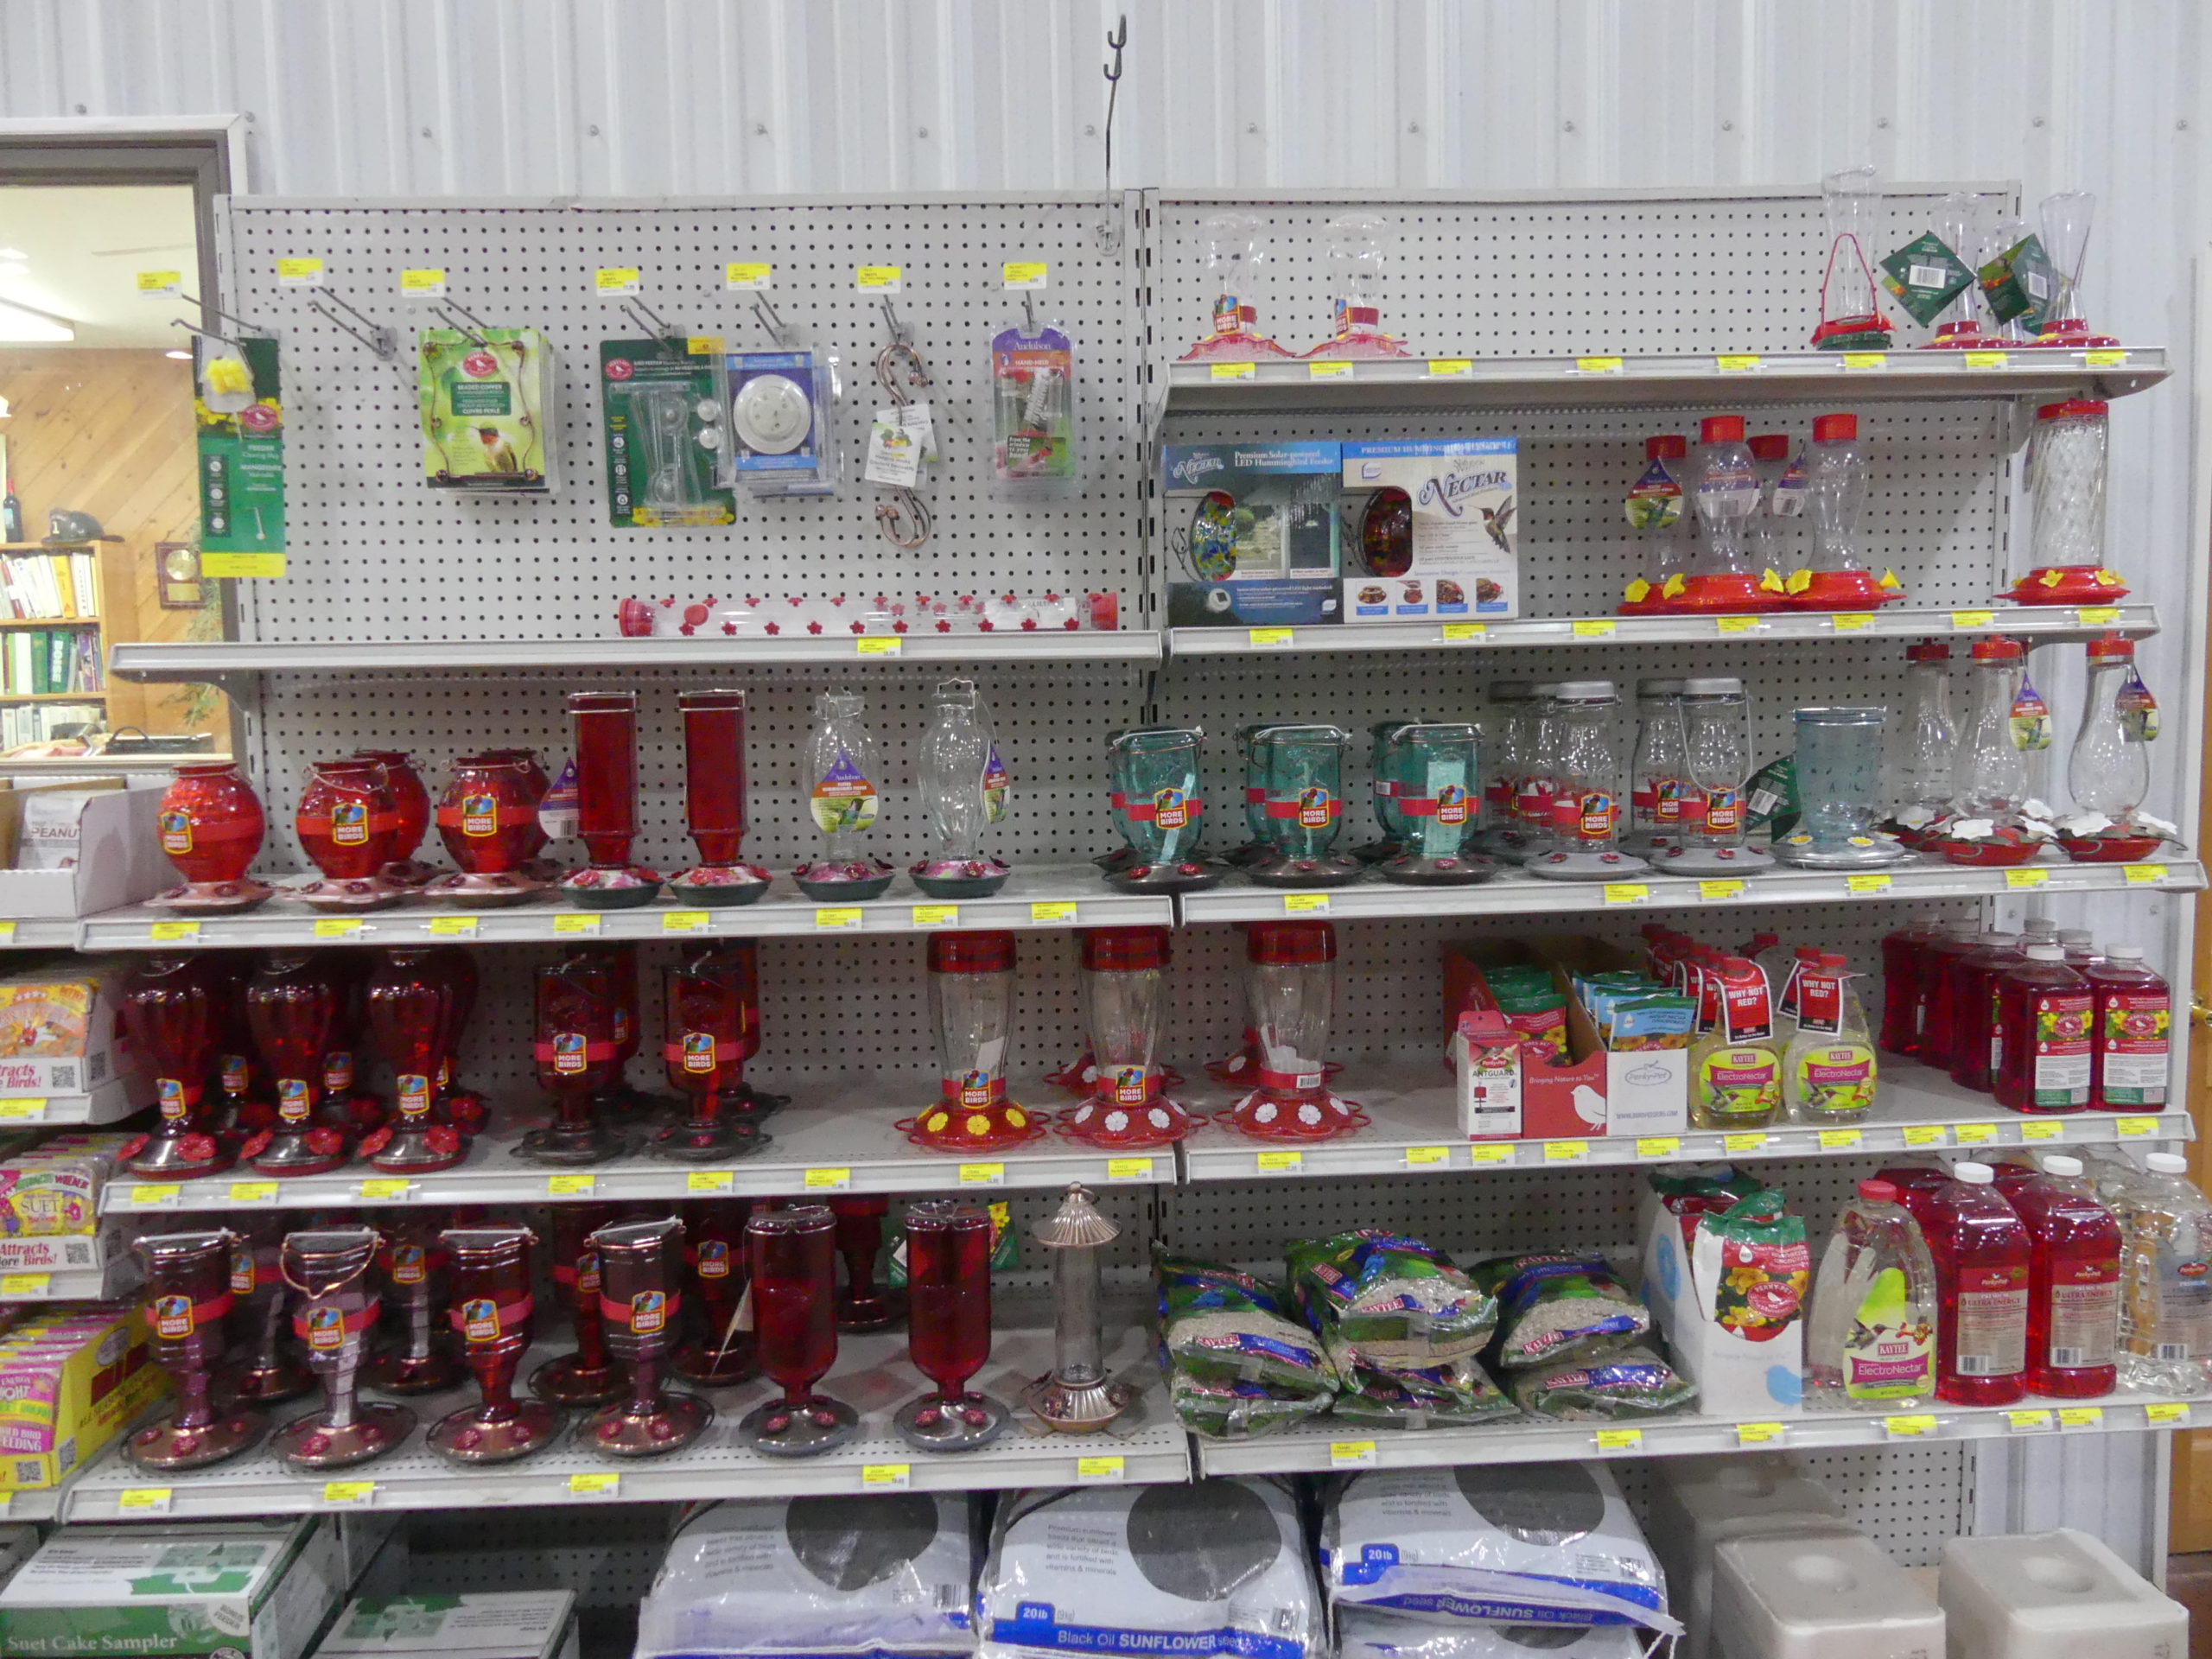 This store had more than a dozen hummingbird feeders to choose from. They are simply reservoirs of sugar water that the birds sip. There’s no need to buy special “nectar.” Just follow the instructions for making a sugar and water brew.